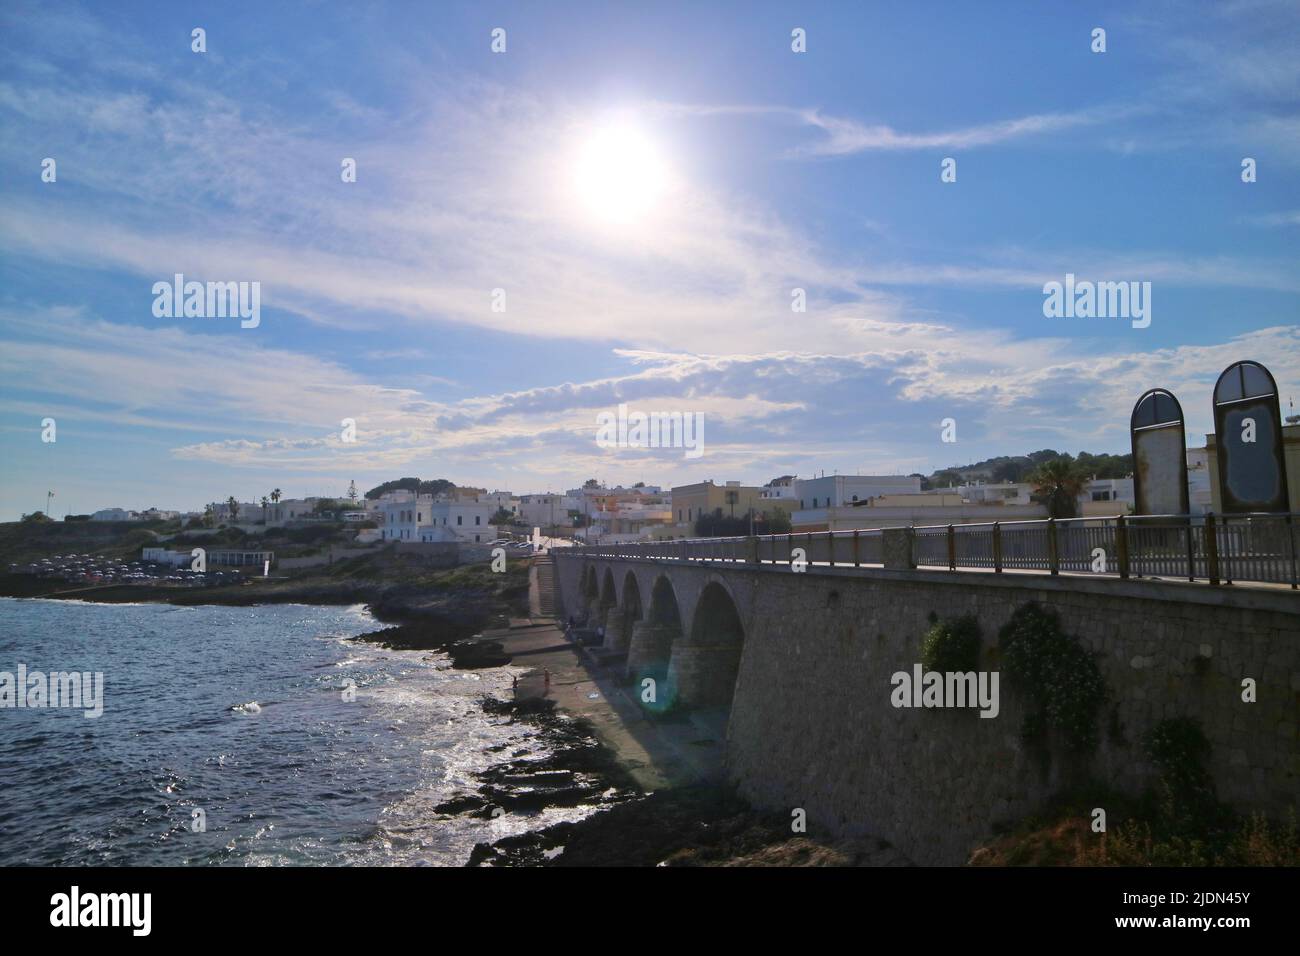 Sunset over Santa Maria di Leuca, a seaside town in southern Italy. Stock Photo